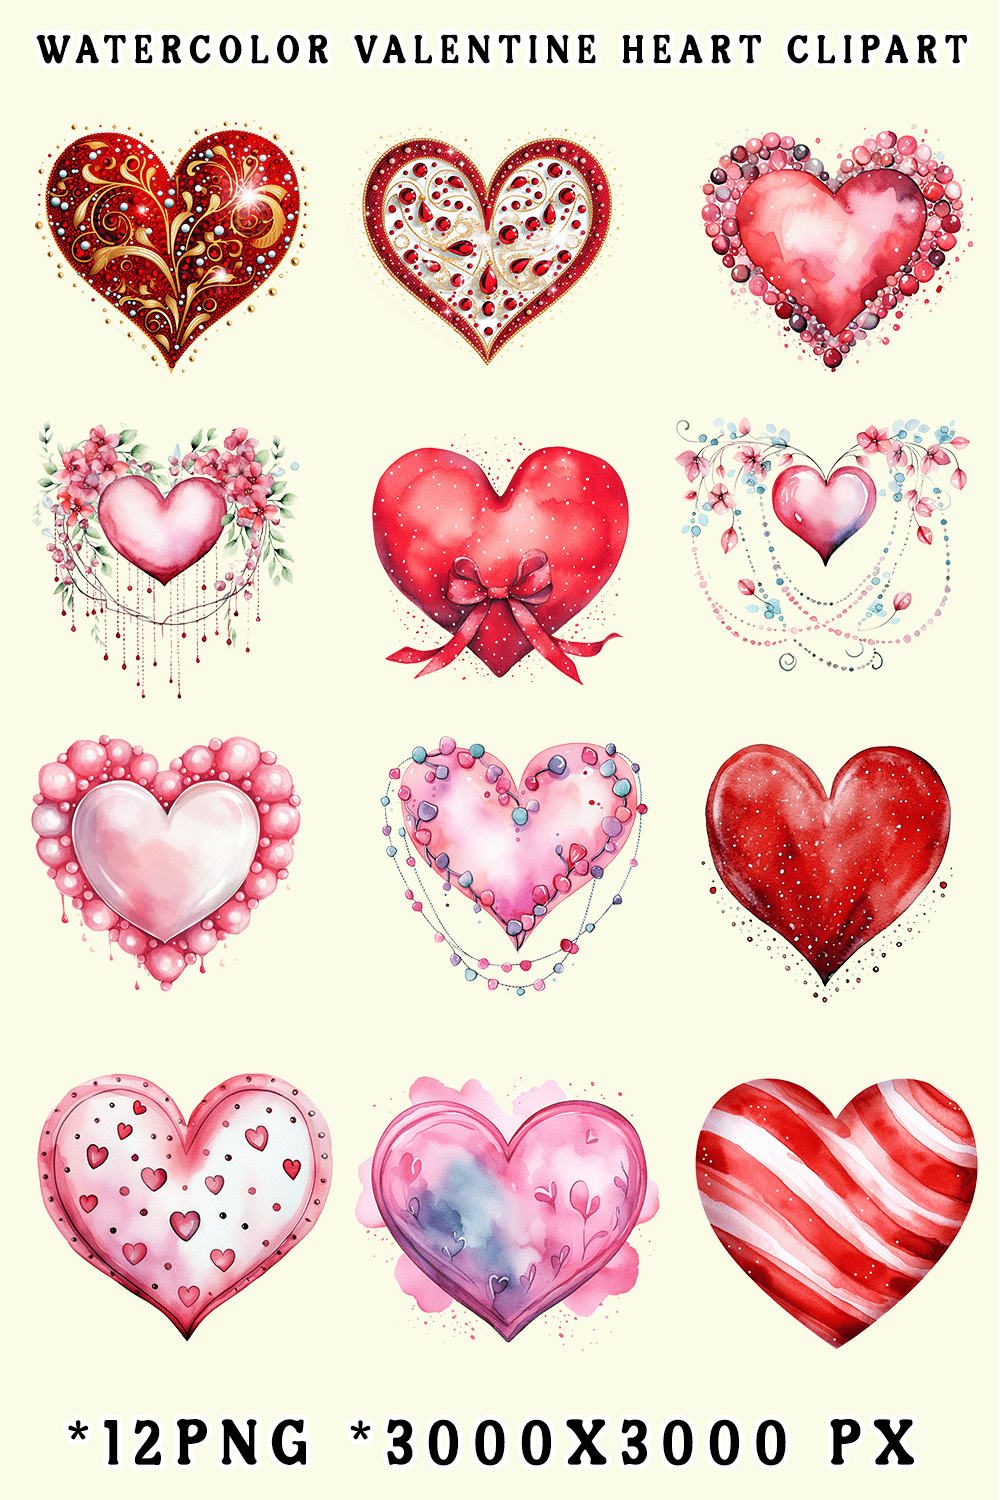 Watercolor Valentine Heart Clipart pinterest preview image.